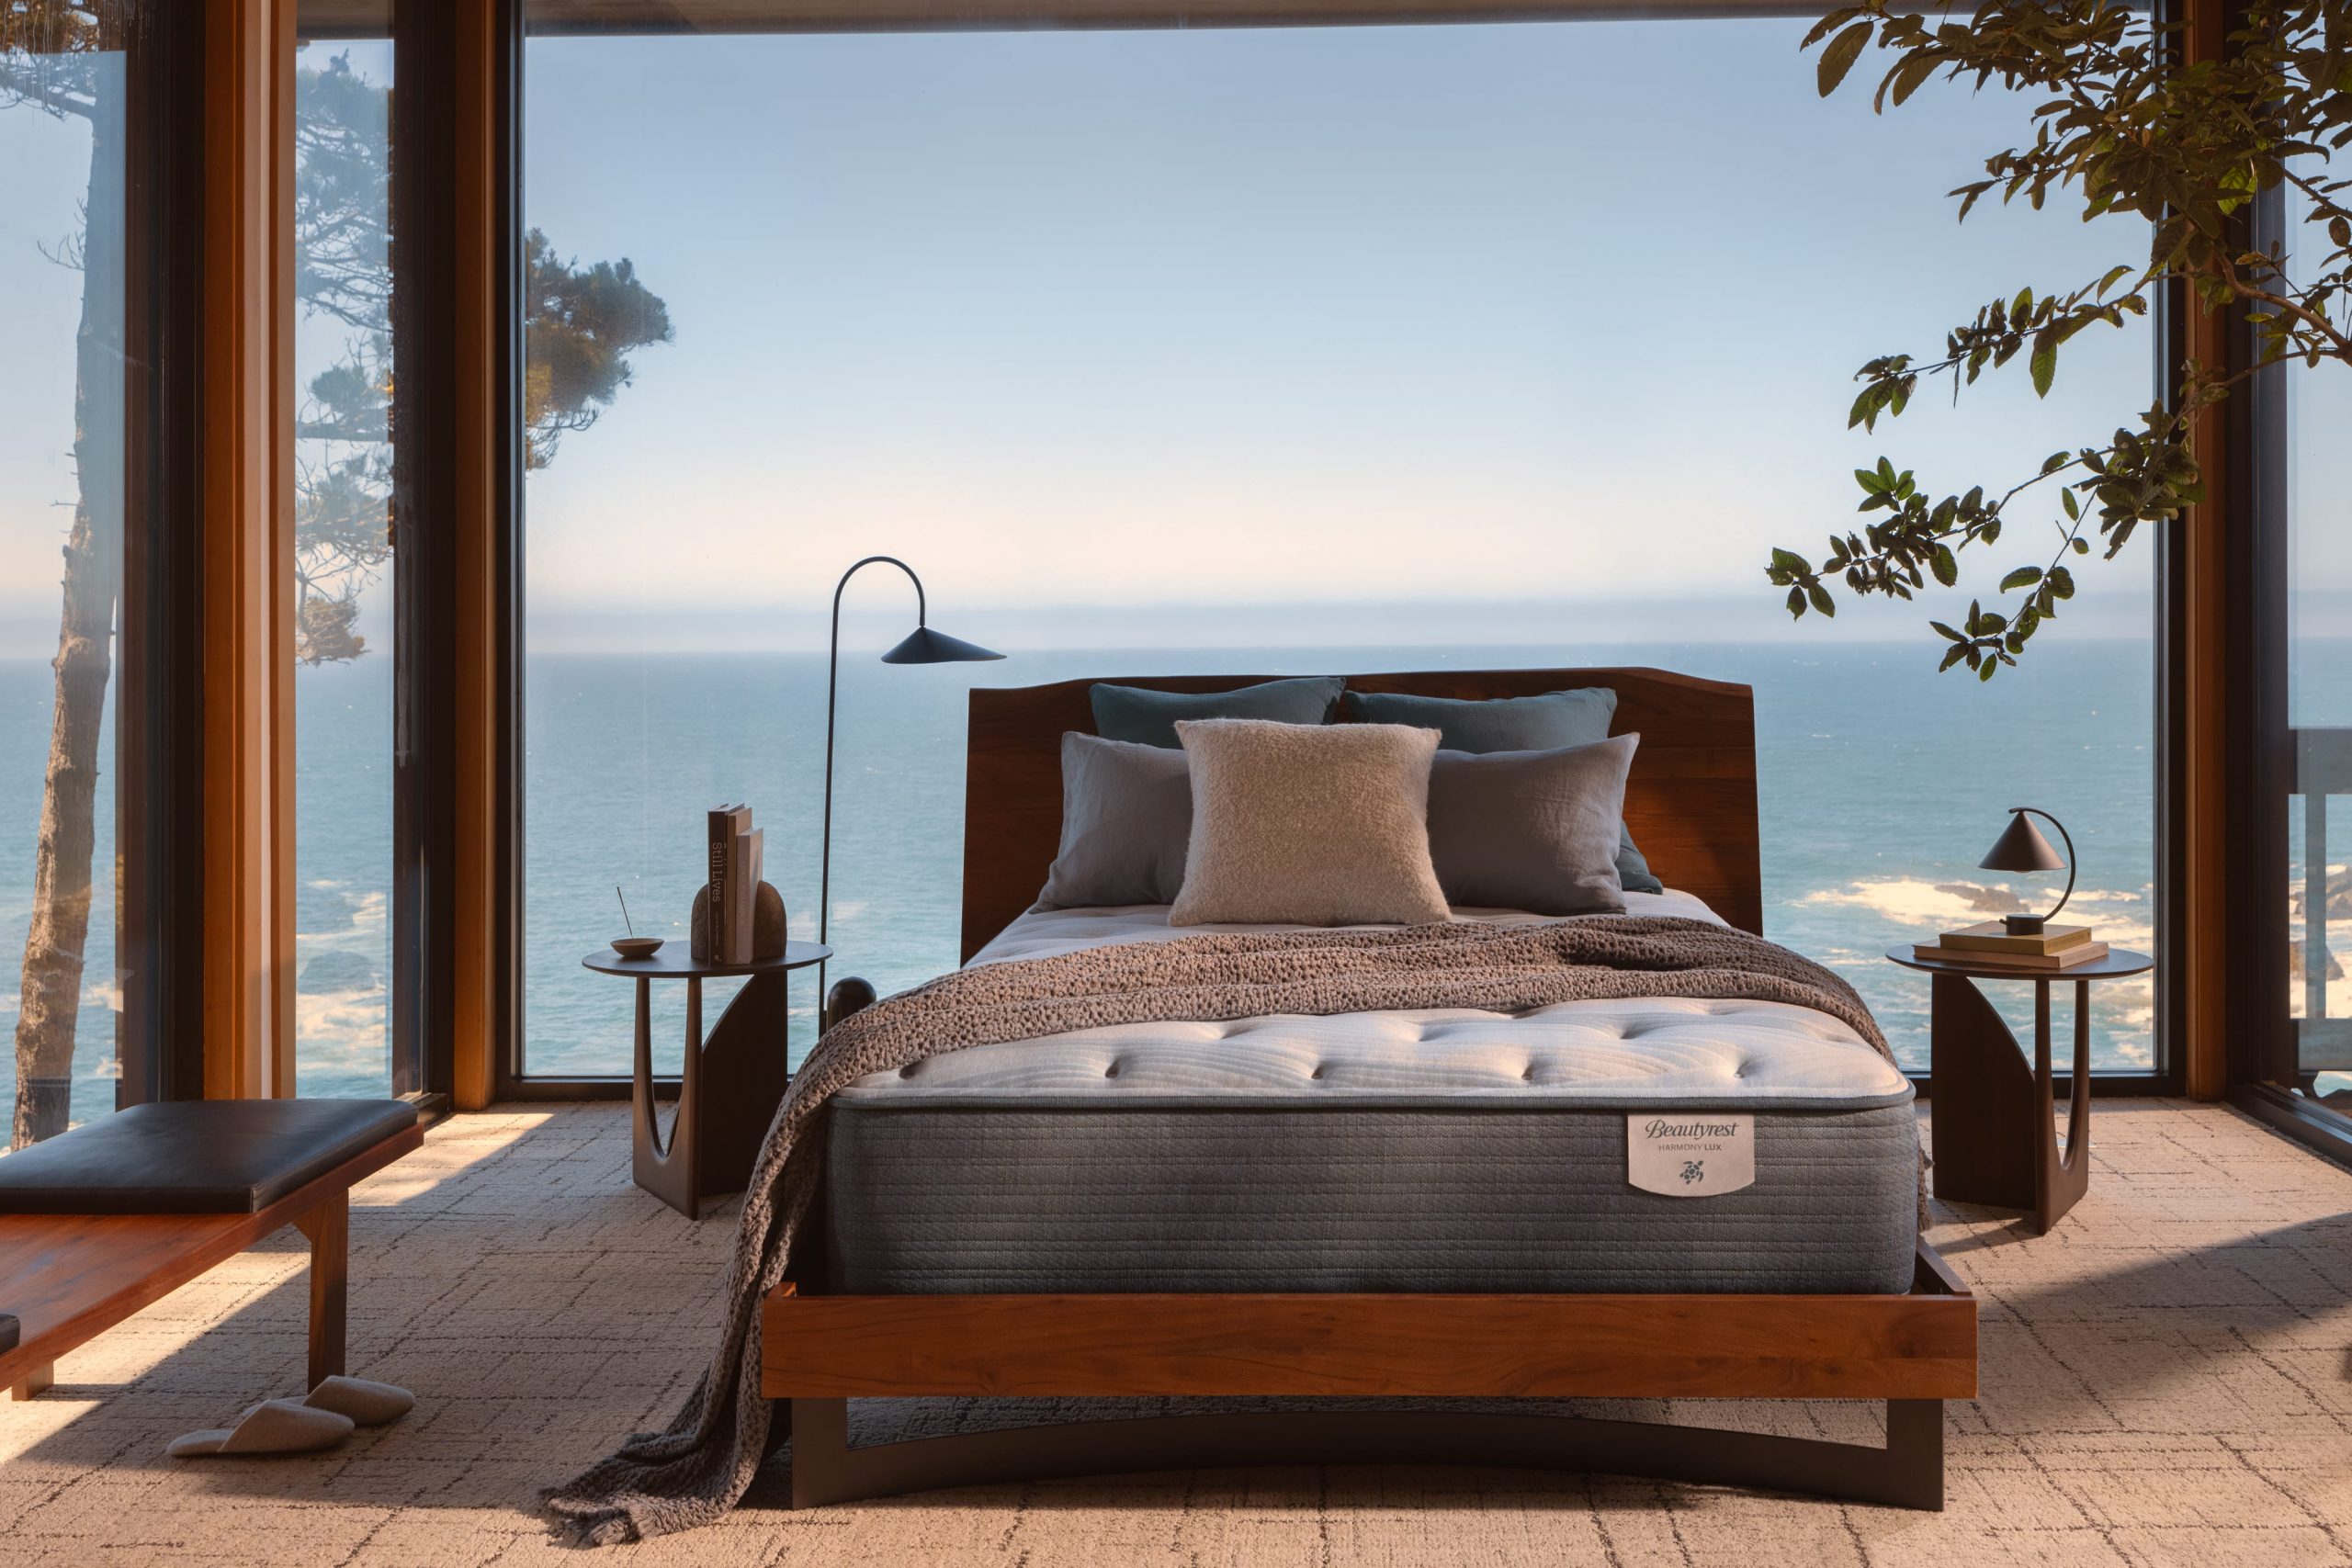 Serta Simmons Bedding Continues to Bring New Products to Market Through ...